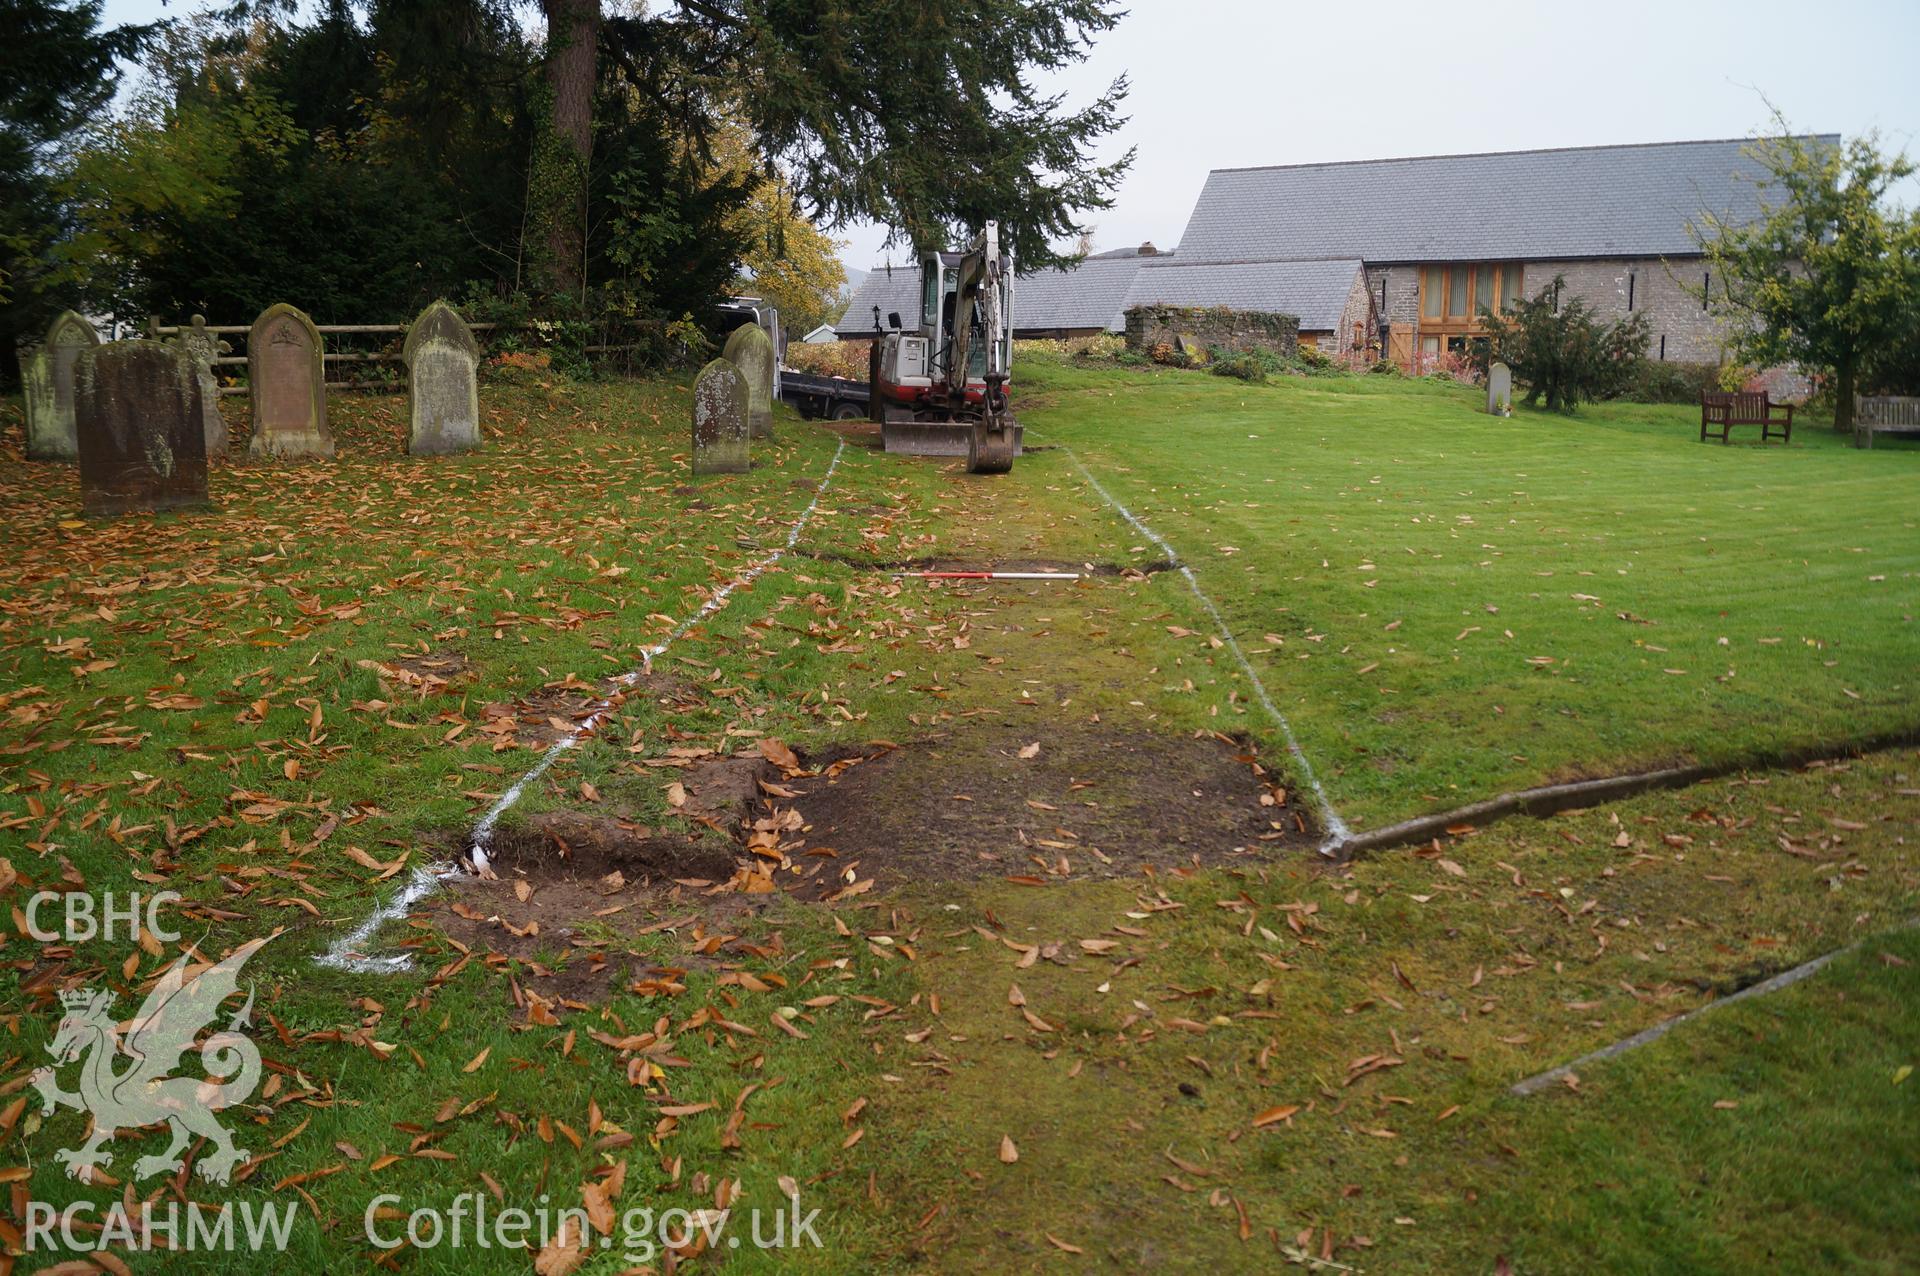 View 'looking west northwest at the new path width marked out' at St. Mary's church in Gladestry, Powys. Photograph and description by Jenny Hall and Paul Sambrook of Trysor, 16th October 2017.